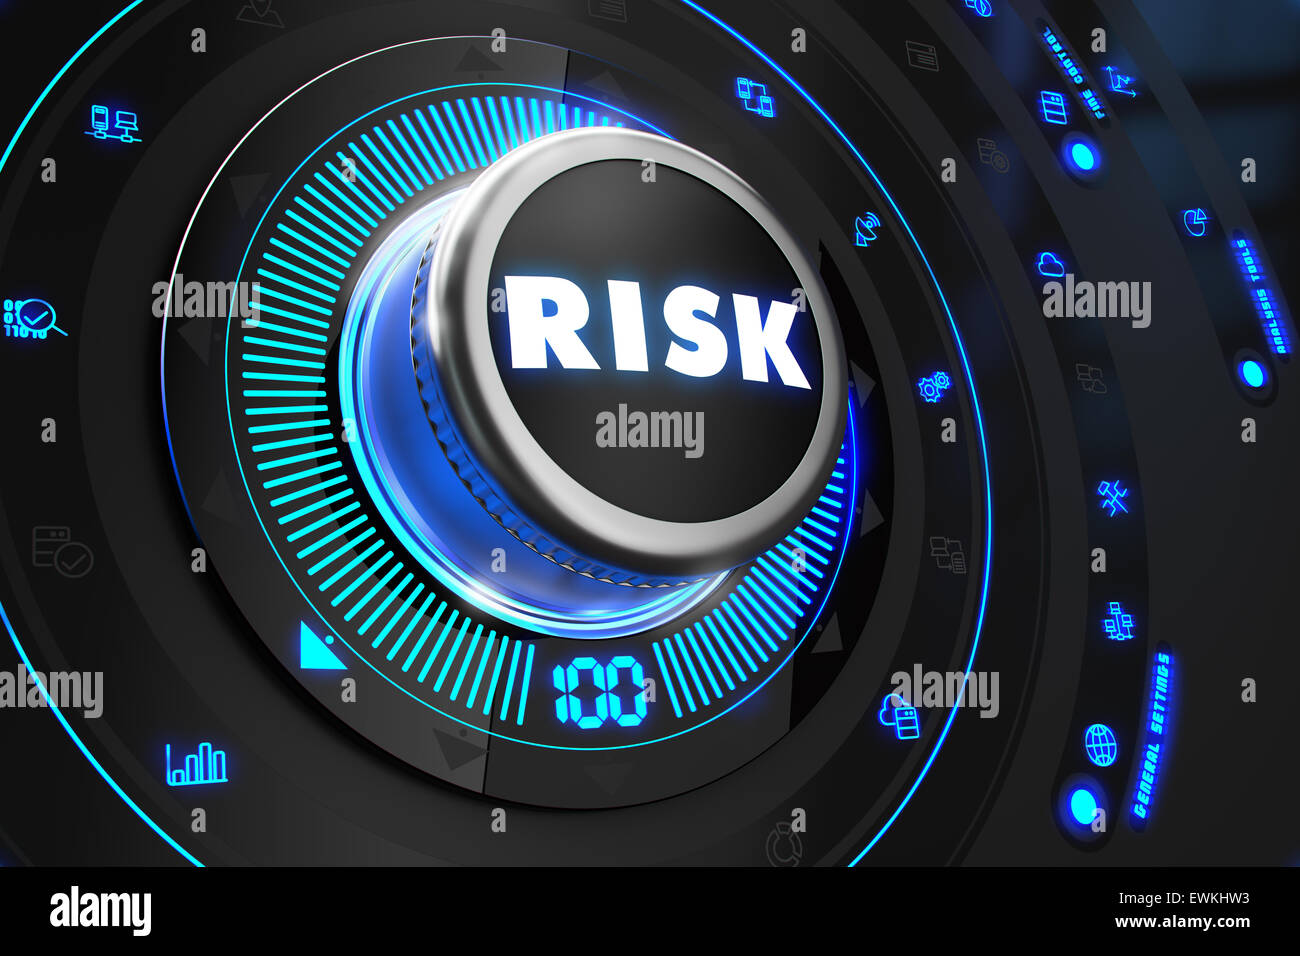 Risk Controller on Black Control Console. Stock Photo